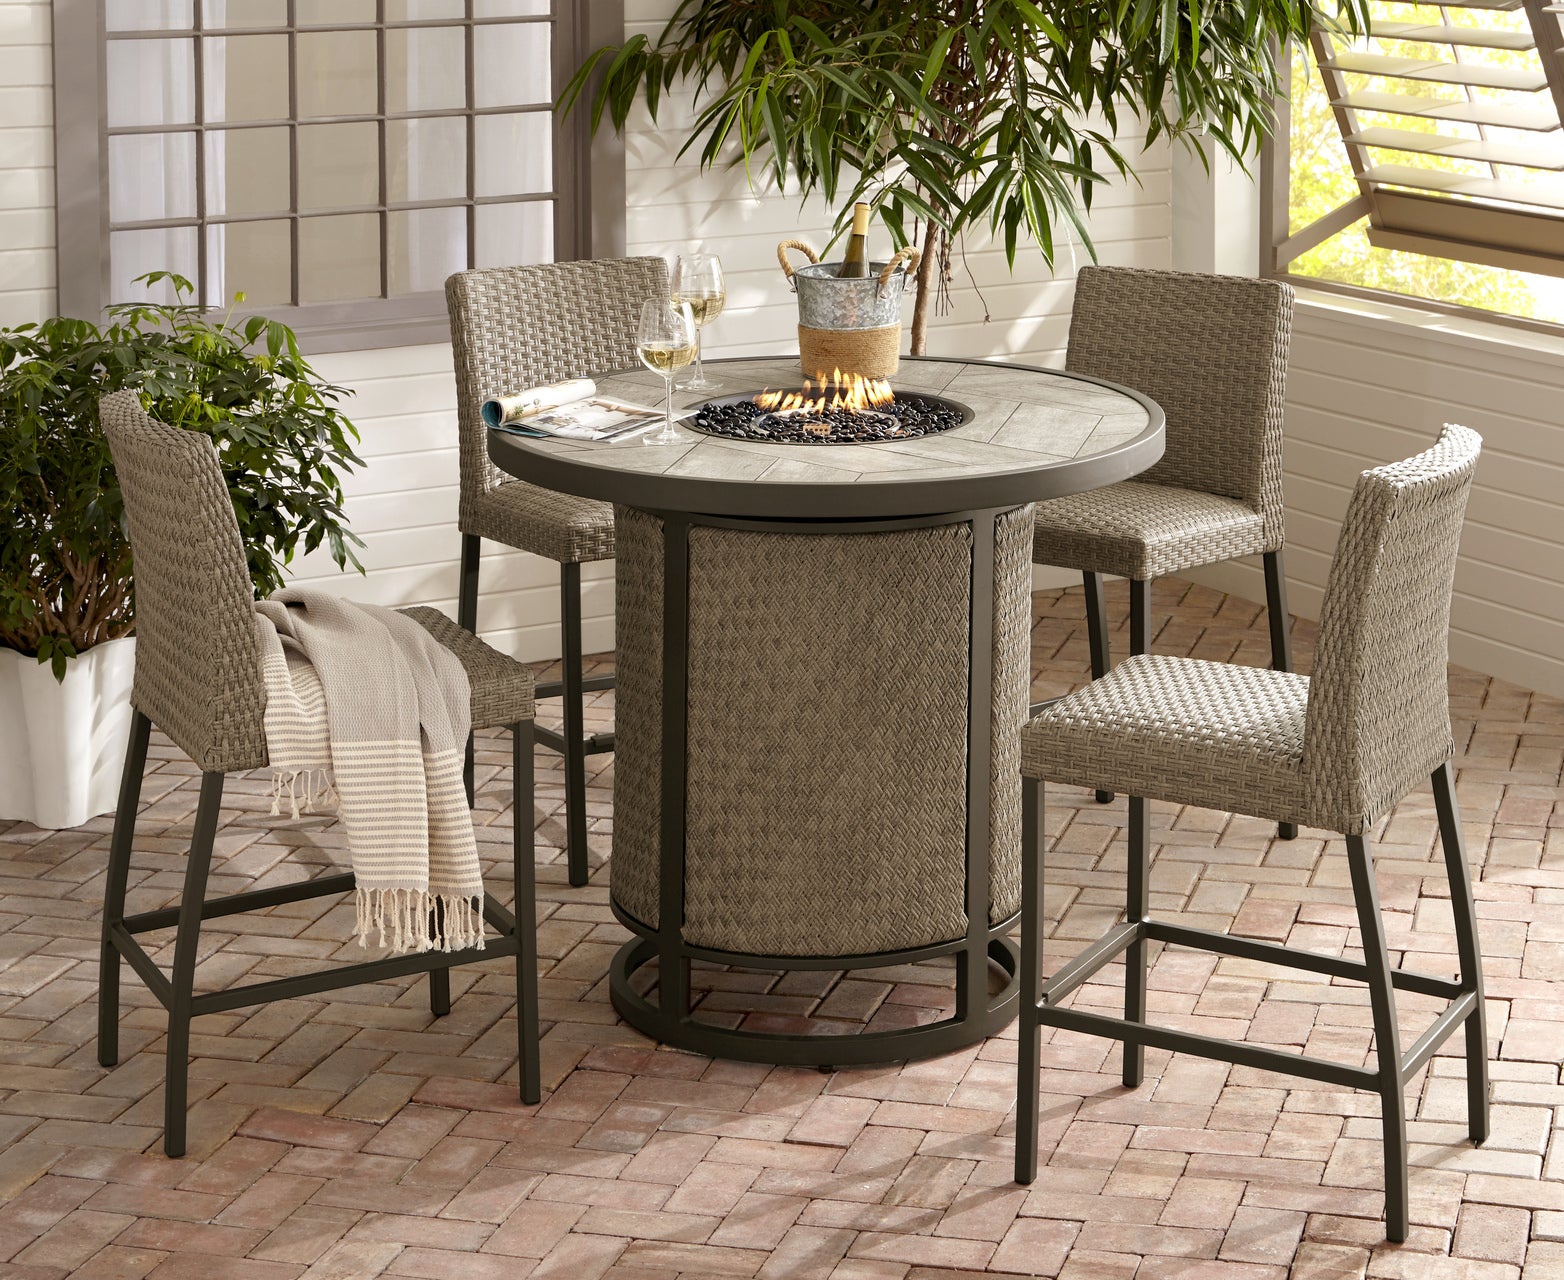 Outdoor Heating - starting at $399